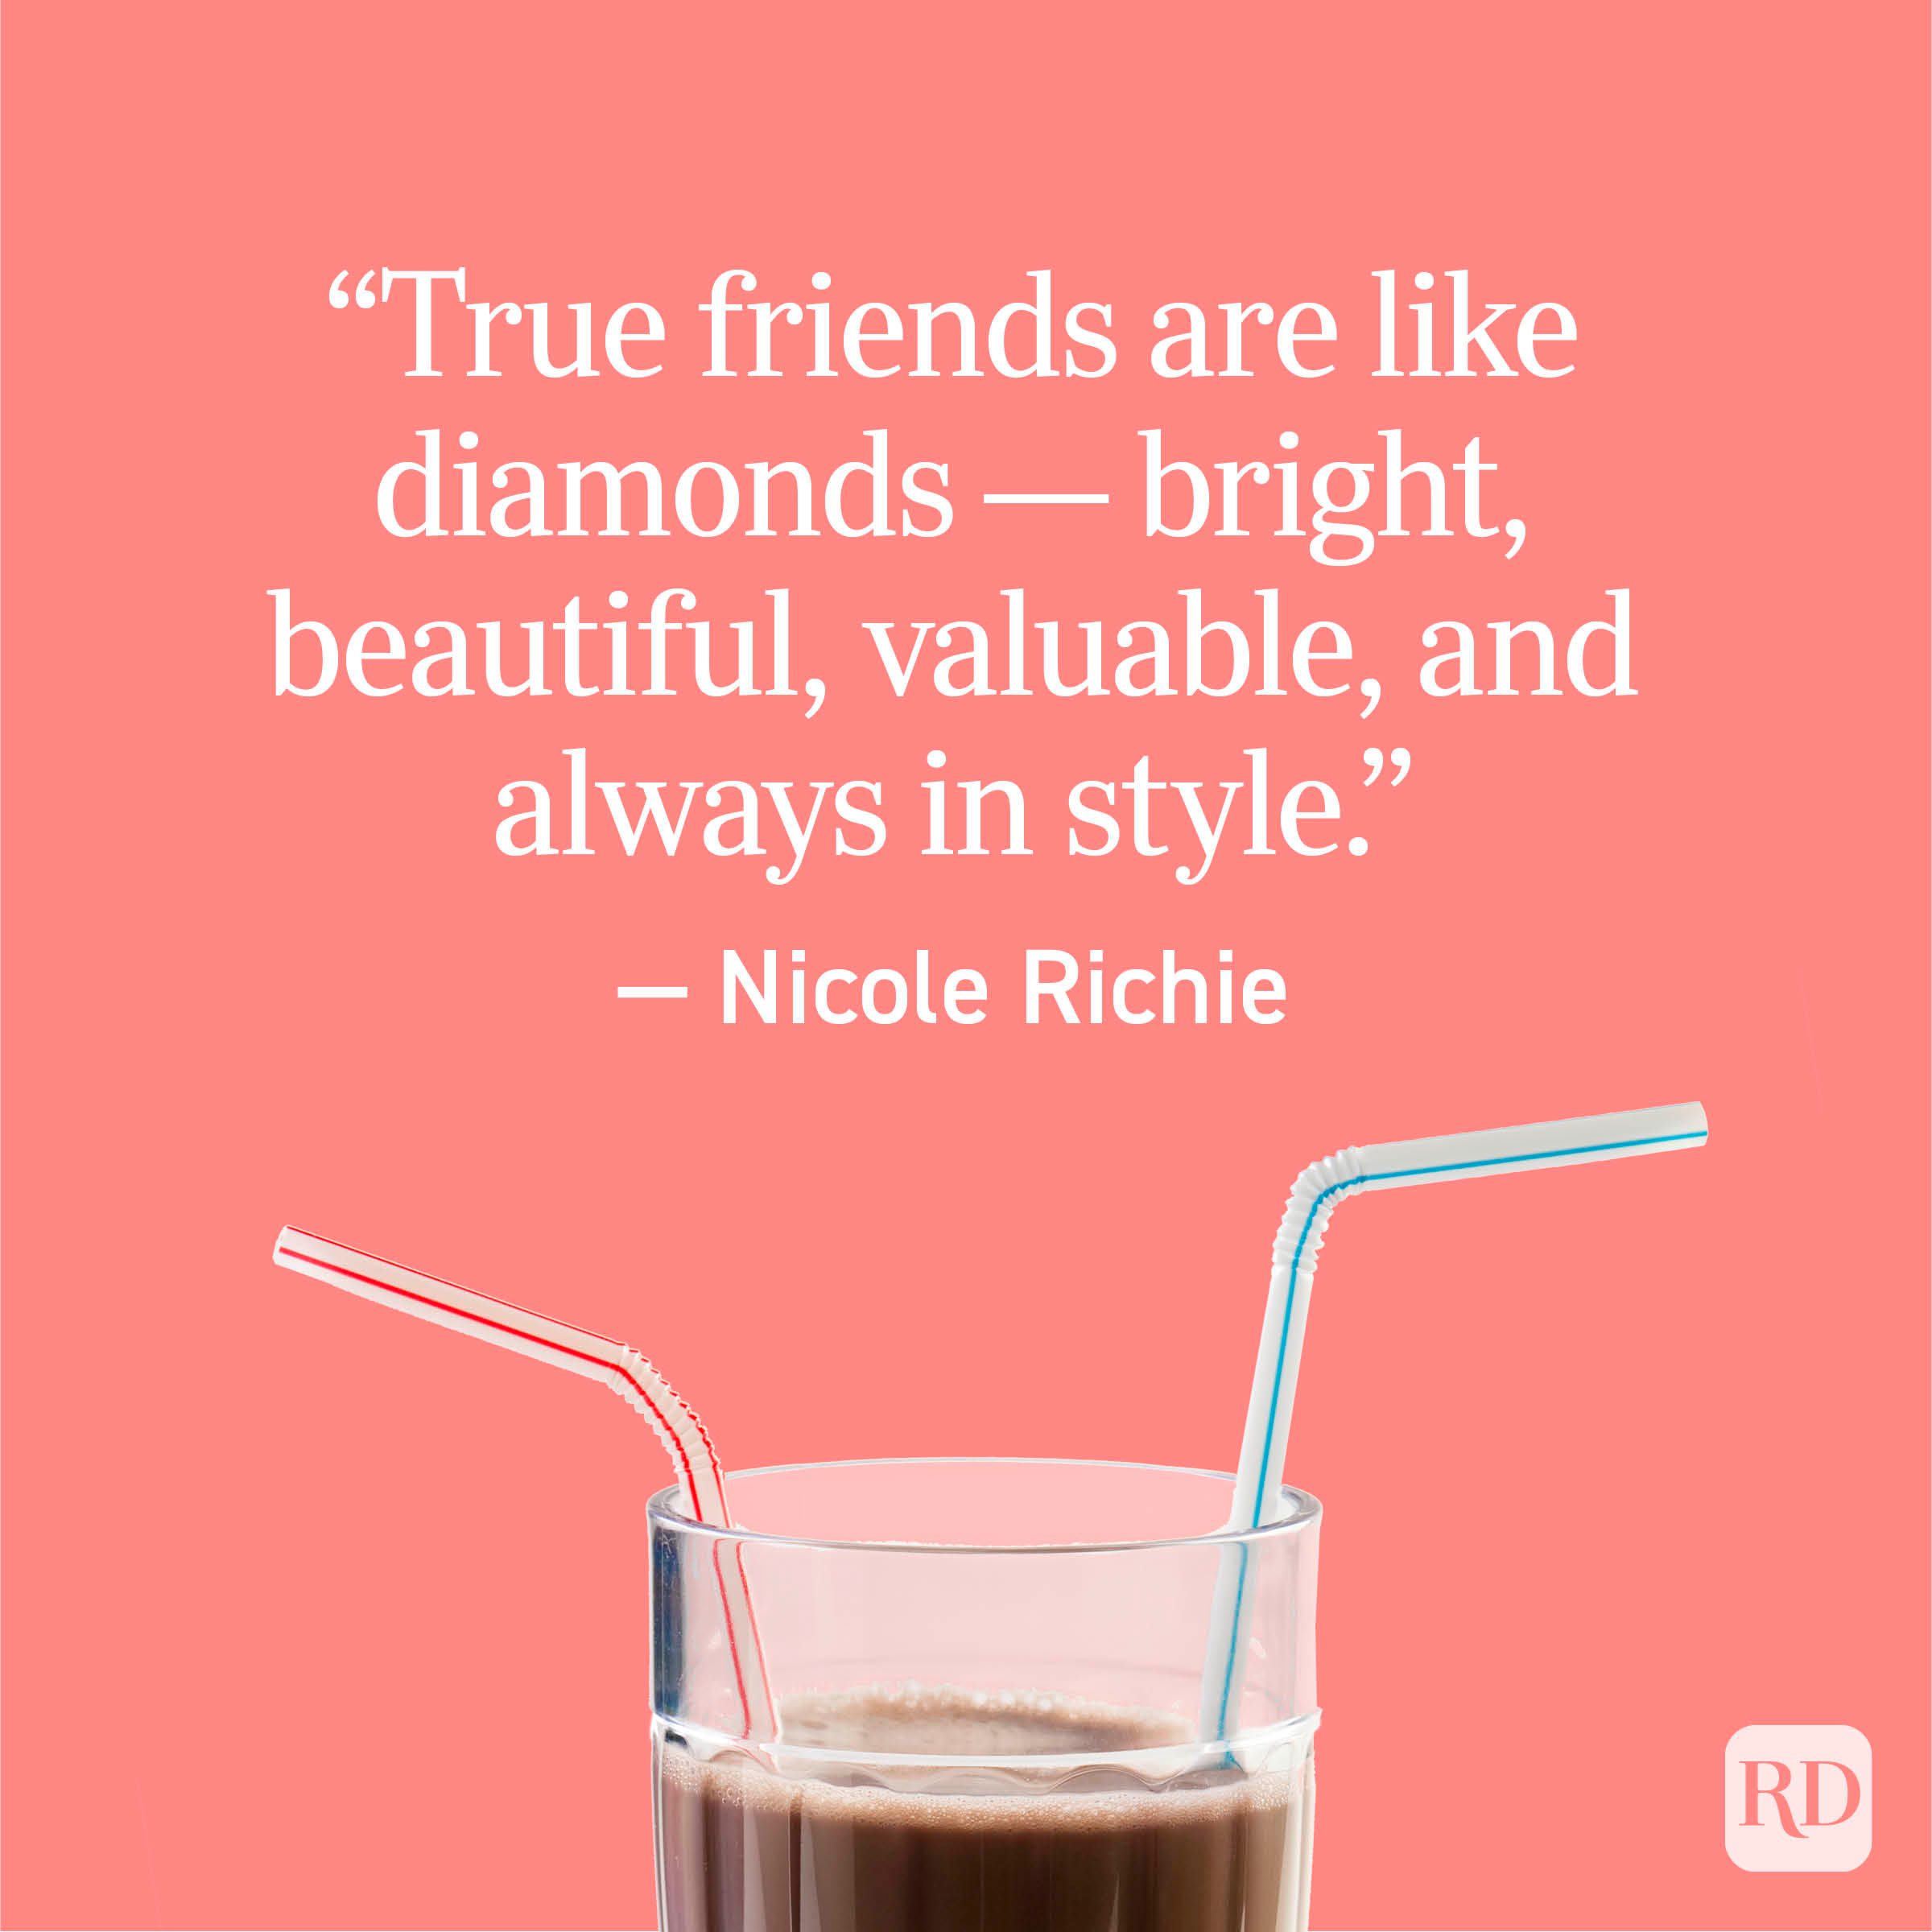 “True friends are like diamonds — bright, beautiful, valuable, and always in style.” — Nicole Richie